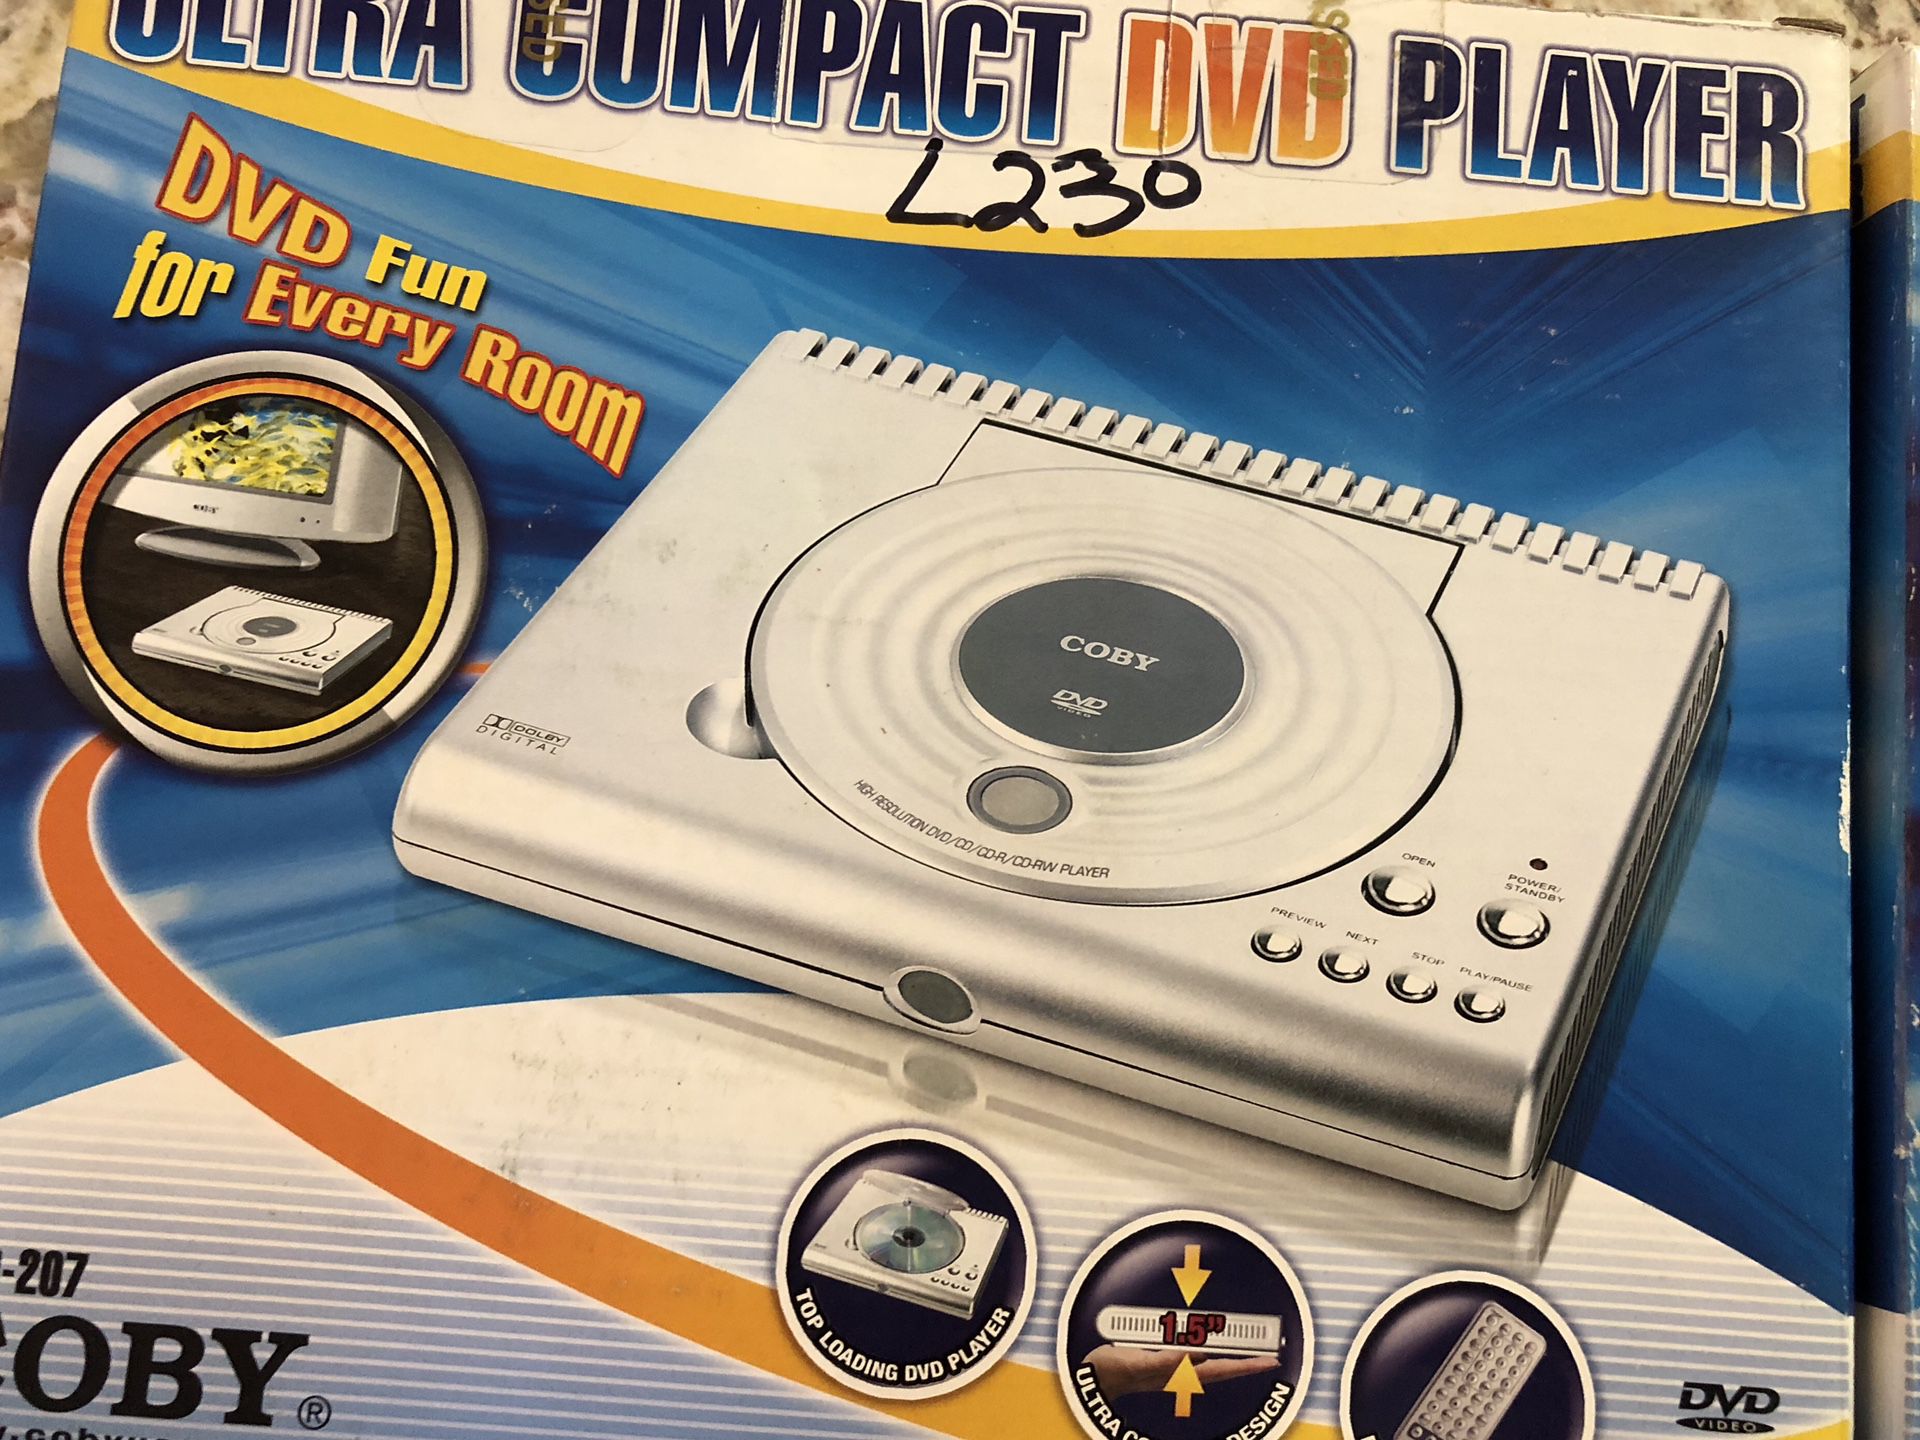 New-DVD players (2)